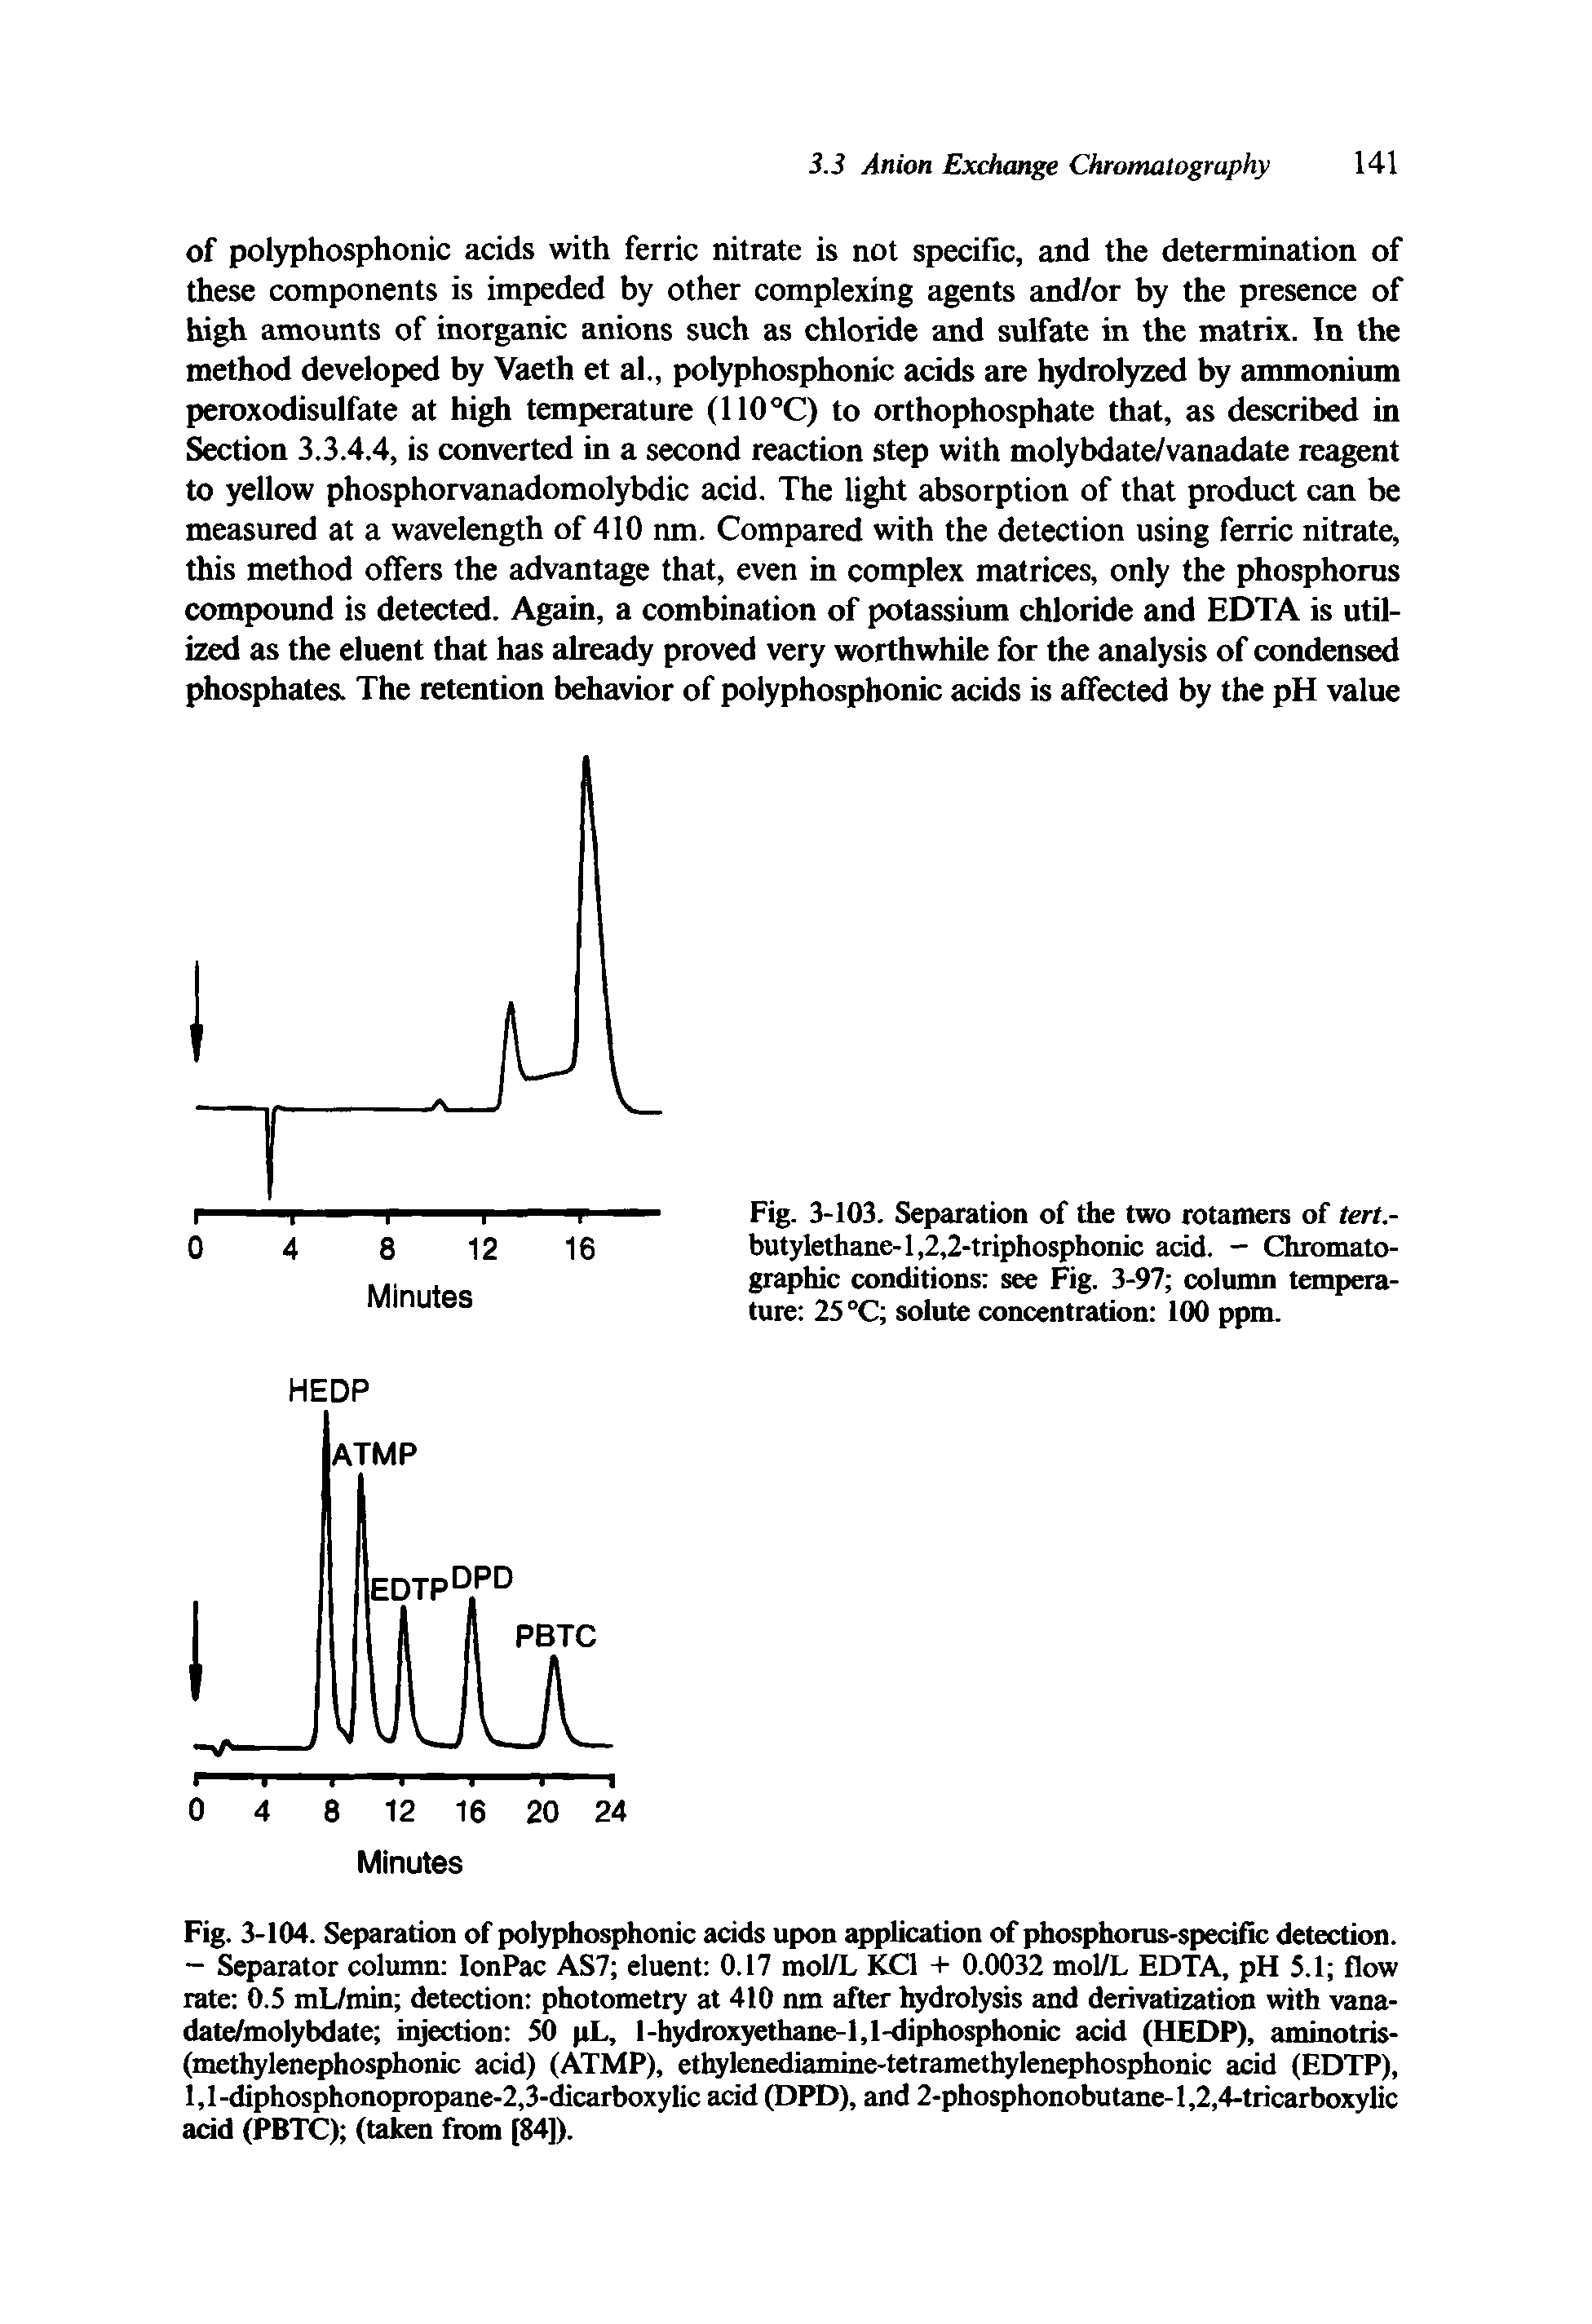 Fig. 3-104. Separation of polyphosphonic acids upon application of phosphorus-specific detection. - Separator column IonPac AS7 eluent 0.17 mol/L KC1 + 0.0032 mol/L EDTA, pH 5.1 flow rate 0.5 mL/min detection photometry at 410 nm after hydrolysis and derivatization with vana-date/molybdate injection 50 pL, l-hydroxyethane-l,l-diphosphonic acid (HEDP), aminotris-(methylenephosphonic acid) (ATMP), ethylenediamine-tetramethylenephosphonic acid (EDTP), l,l-diphosphonopropane-2,3-dicarboxylic acid (DPD), and 2-phosphonobutane-l,2,4-tricarboxylic add (PBTC) (taken from [84]).